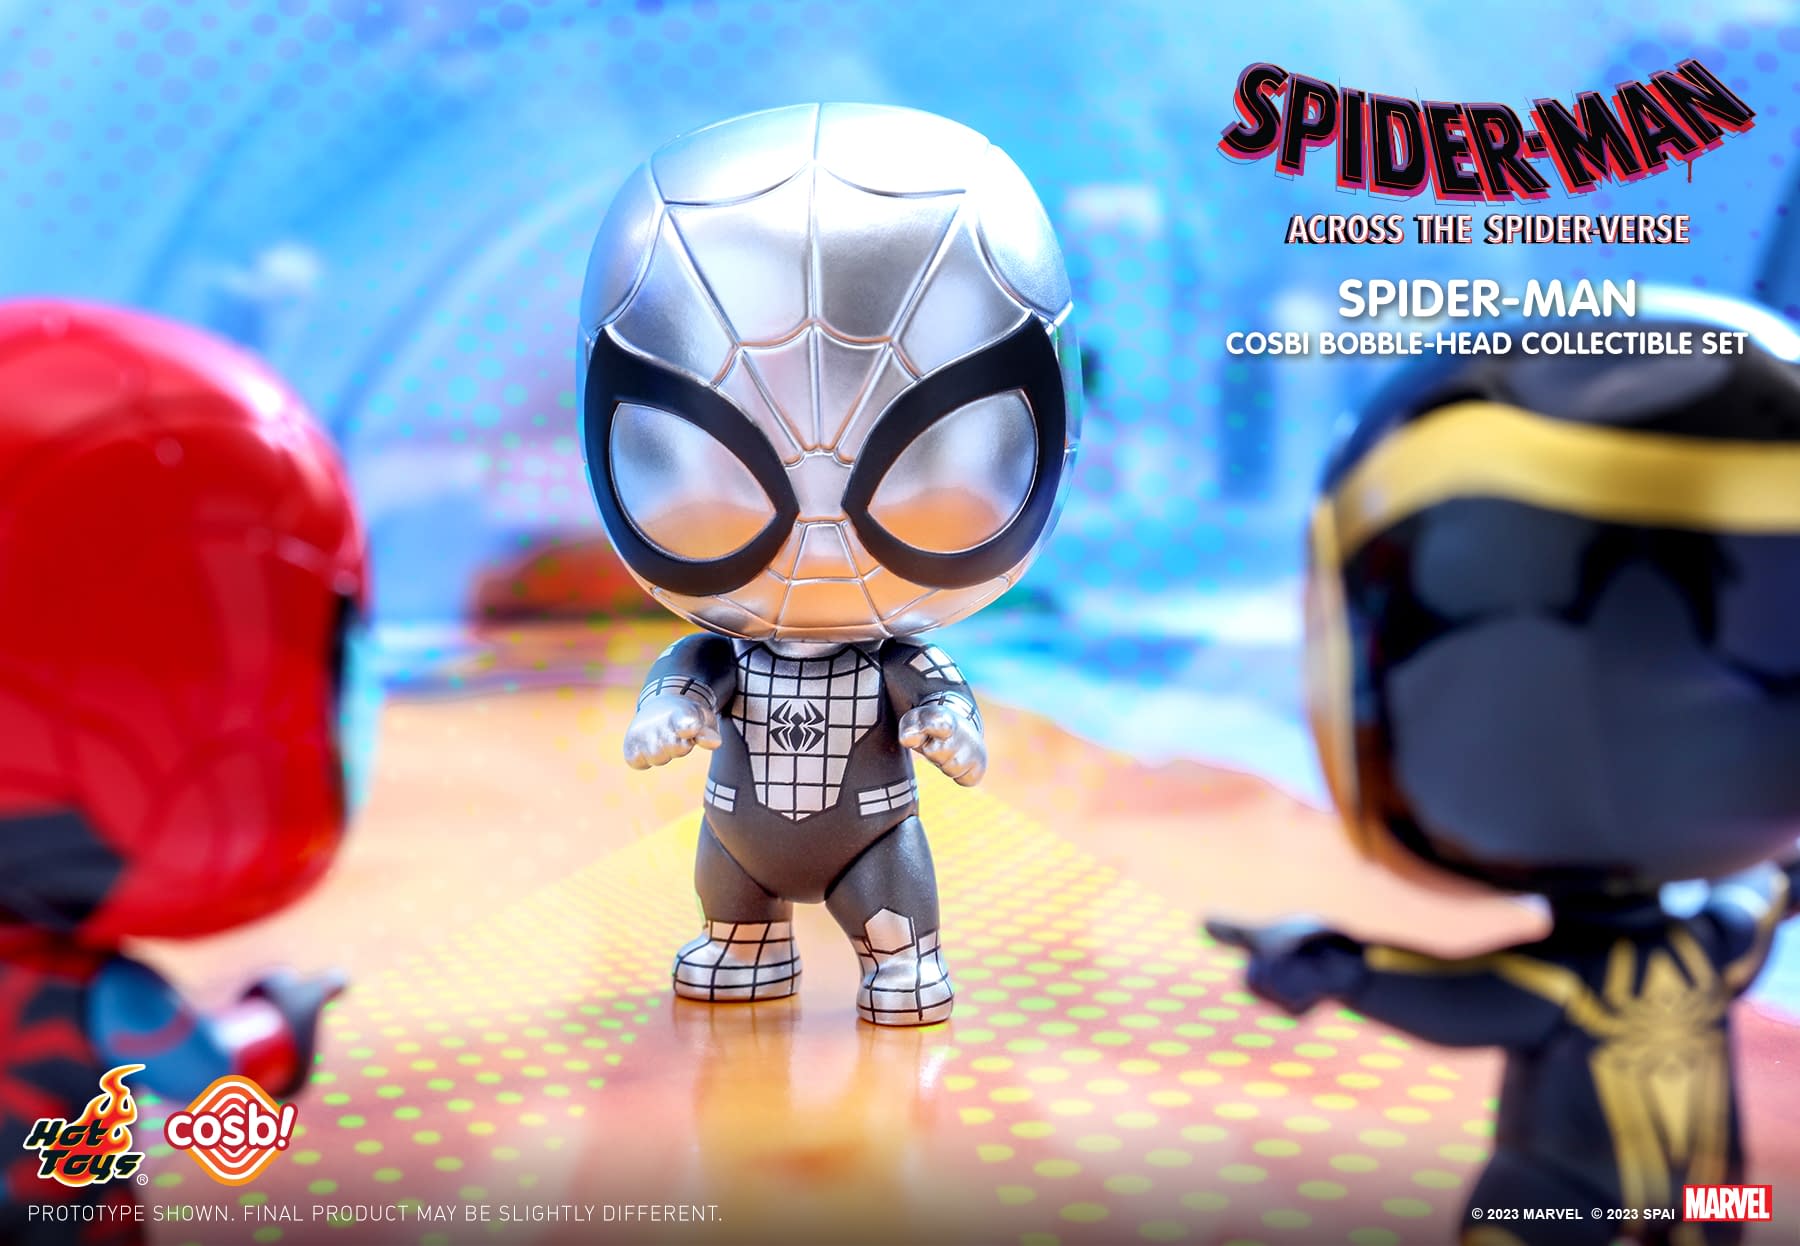 Enter the Spider Society with Hot Toys Newest Spider-Man Cosbi Set